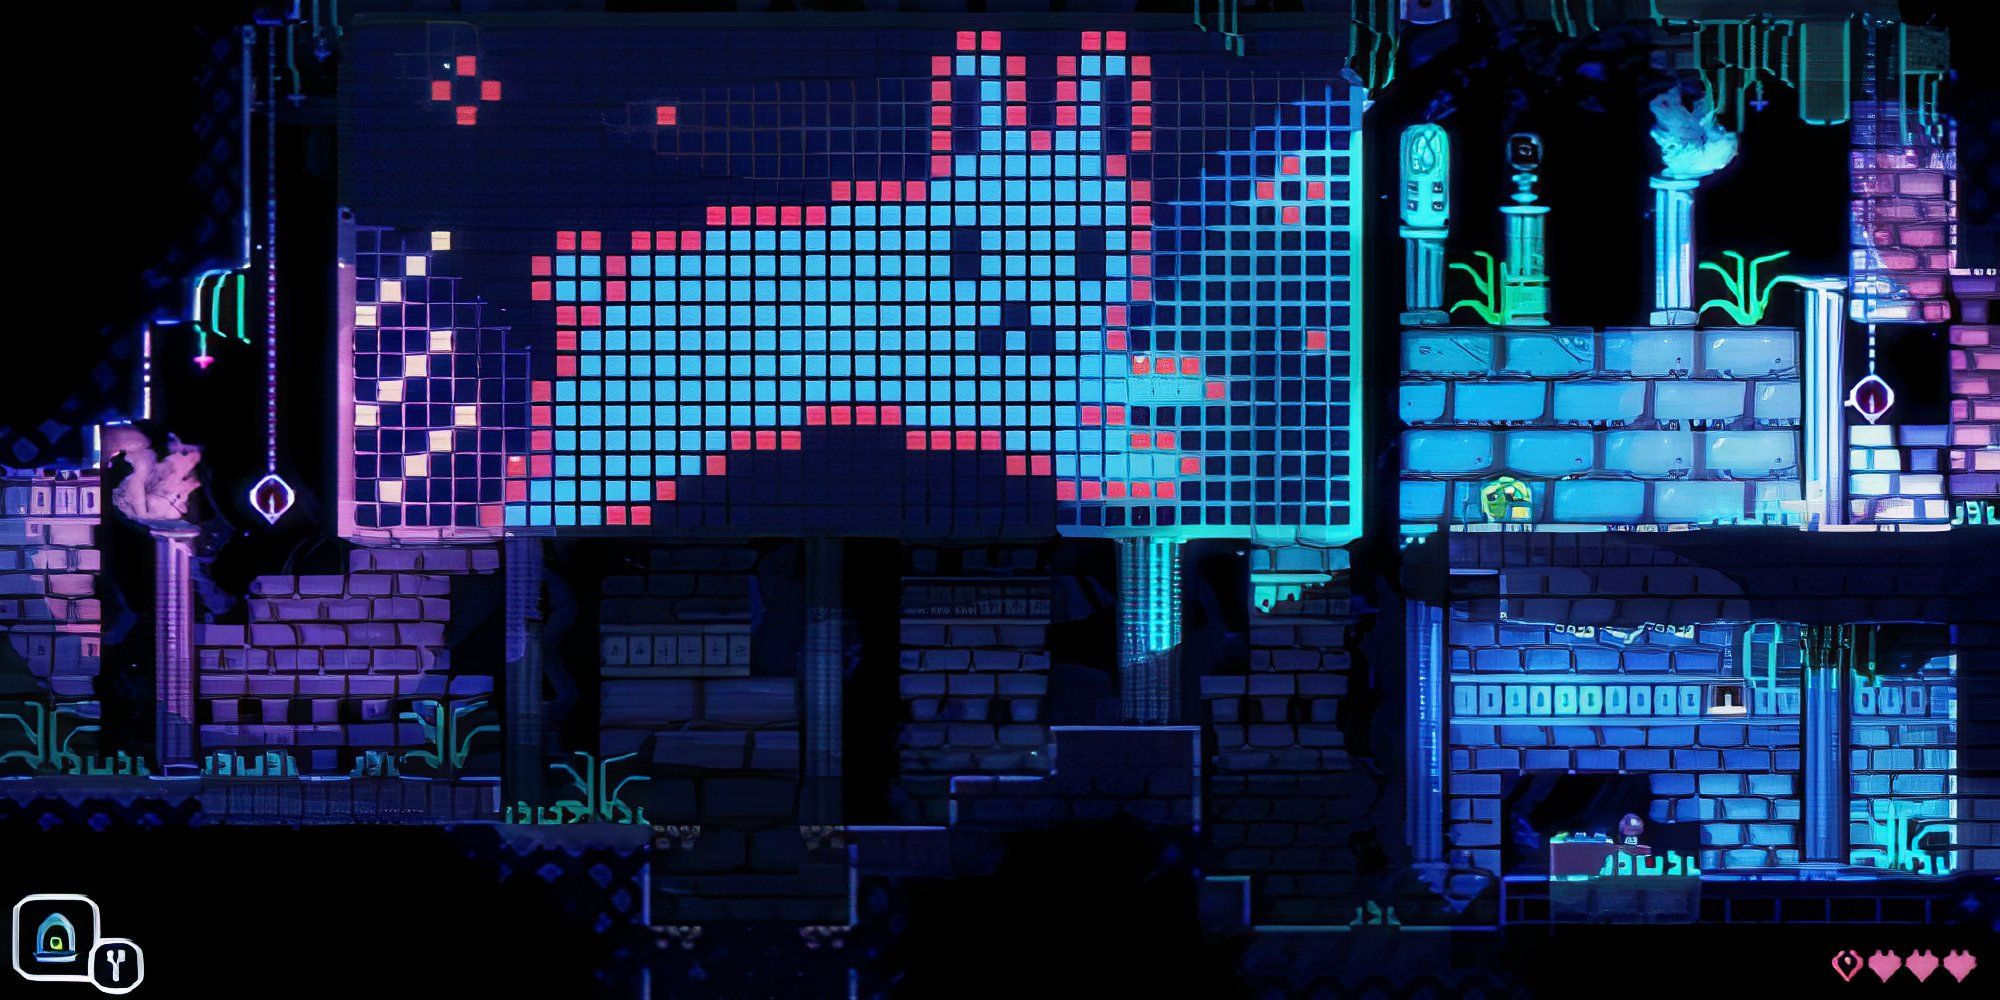 Still from Animal Well of the Pixel Bunny Puzzle in an underground labyrinth with neon colors.